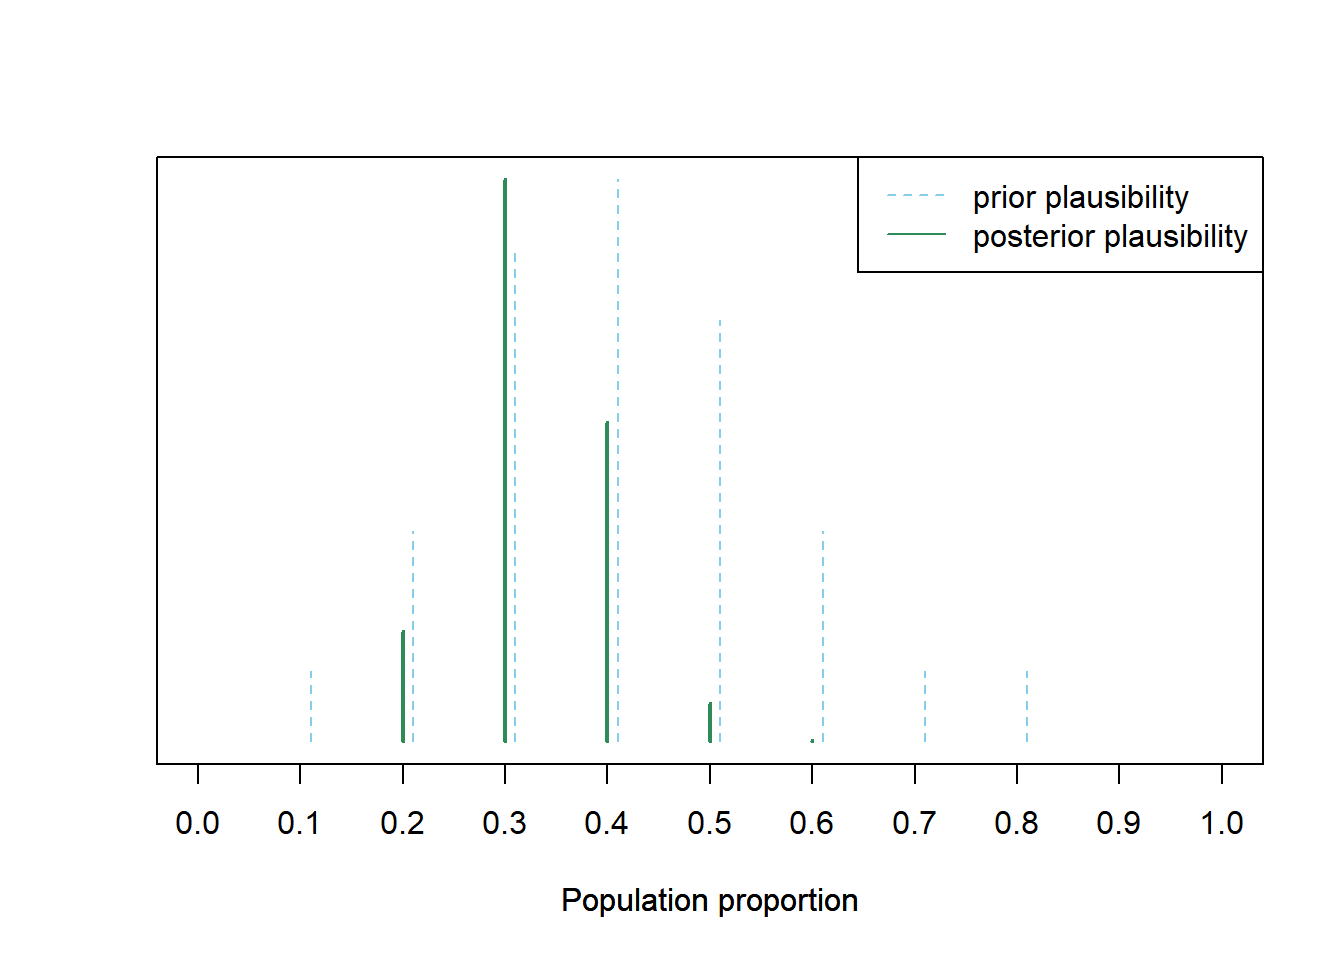 Left: Simulation results from the plot on the right in Figure 1.3 highlighting samples with a sample proportion of 9/30. Right: Distribution reflecting relative plausibility of possible values of the population proportion, both “prior” plausibility (blue) and “posterior” plausibility after observing a sample of 30 students in which 9 have read at least one Harry Potter book (green).